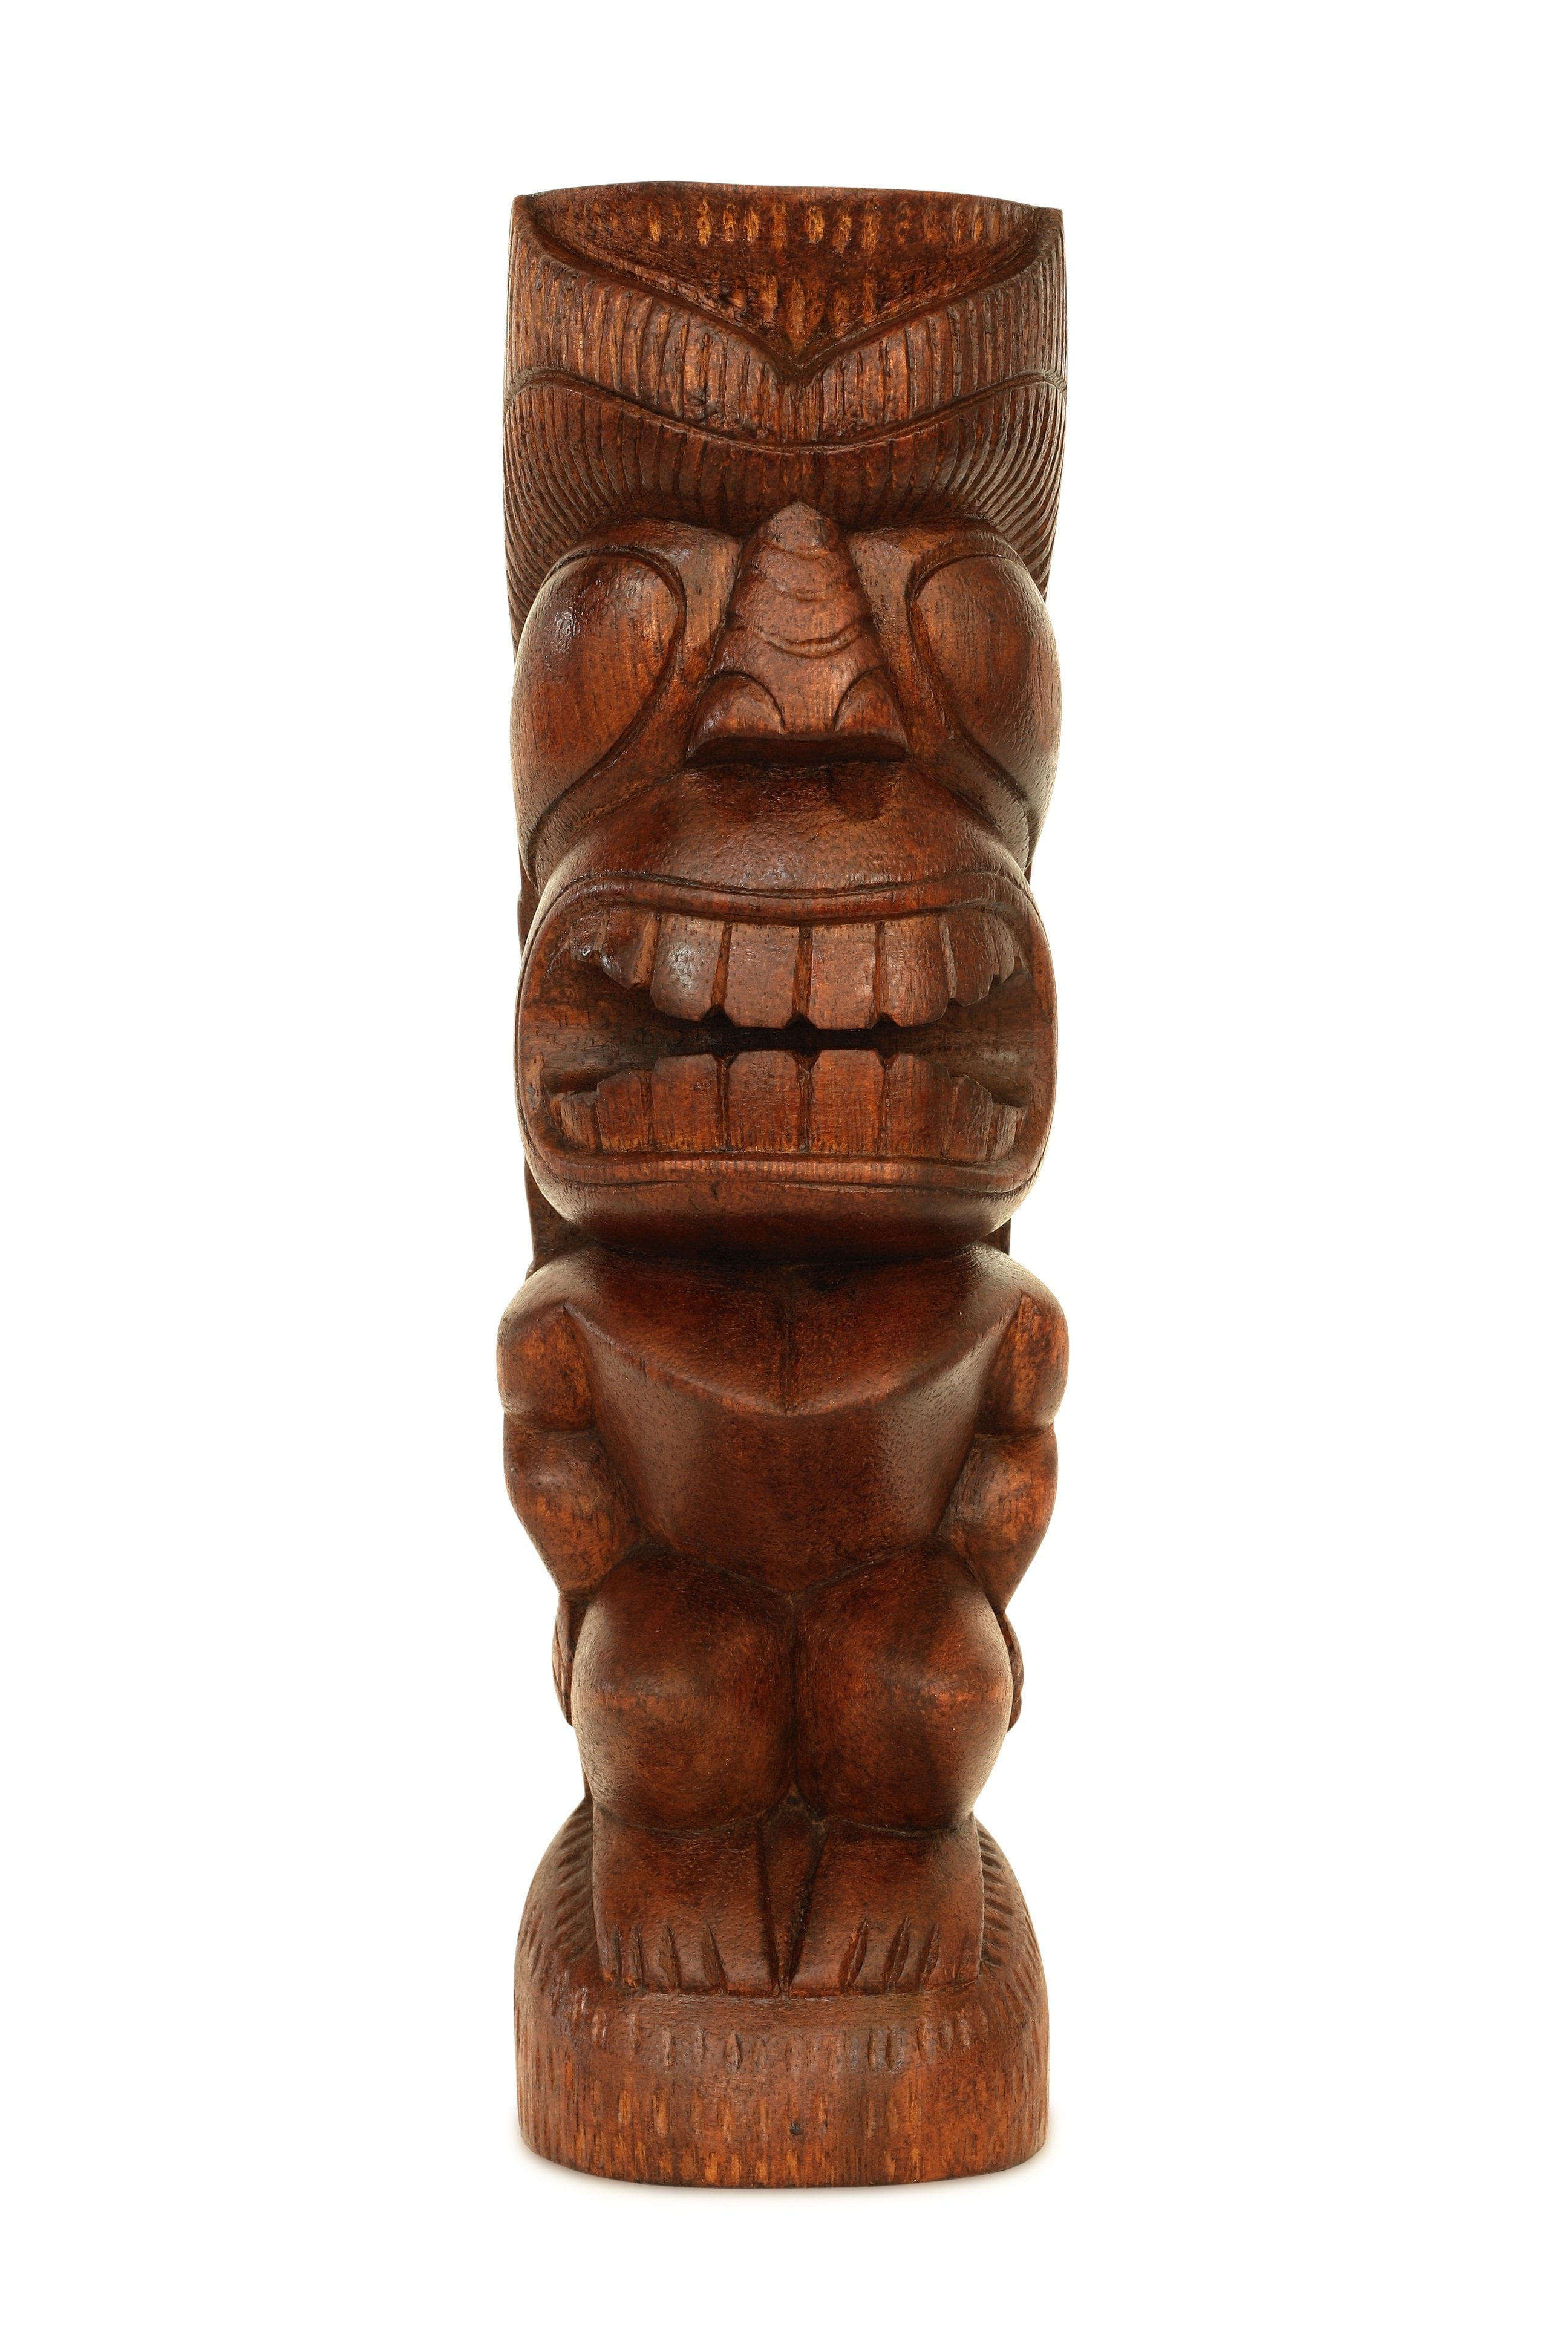 Wooden totem pole carving ~ Hand made & painted in Bali ~ Cool funky ornament 